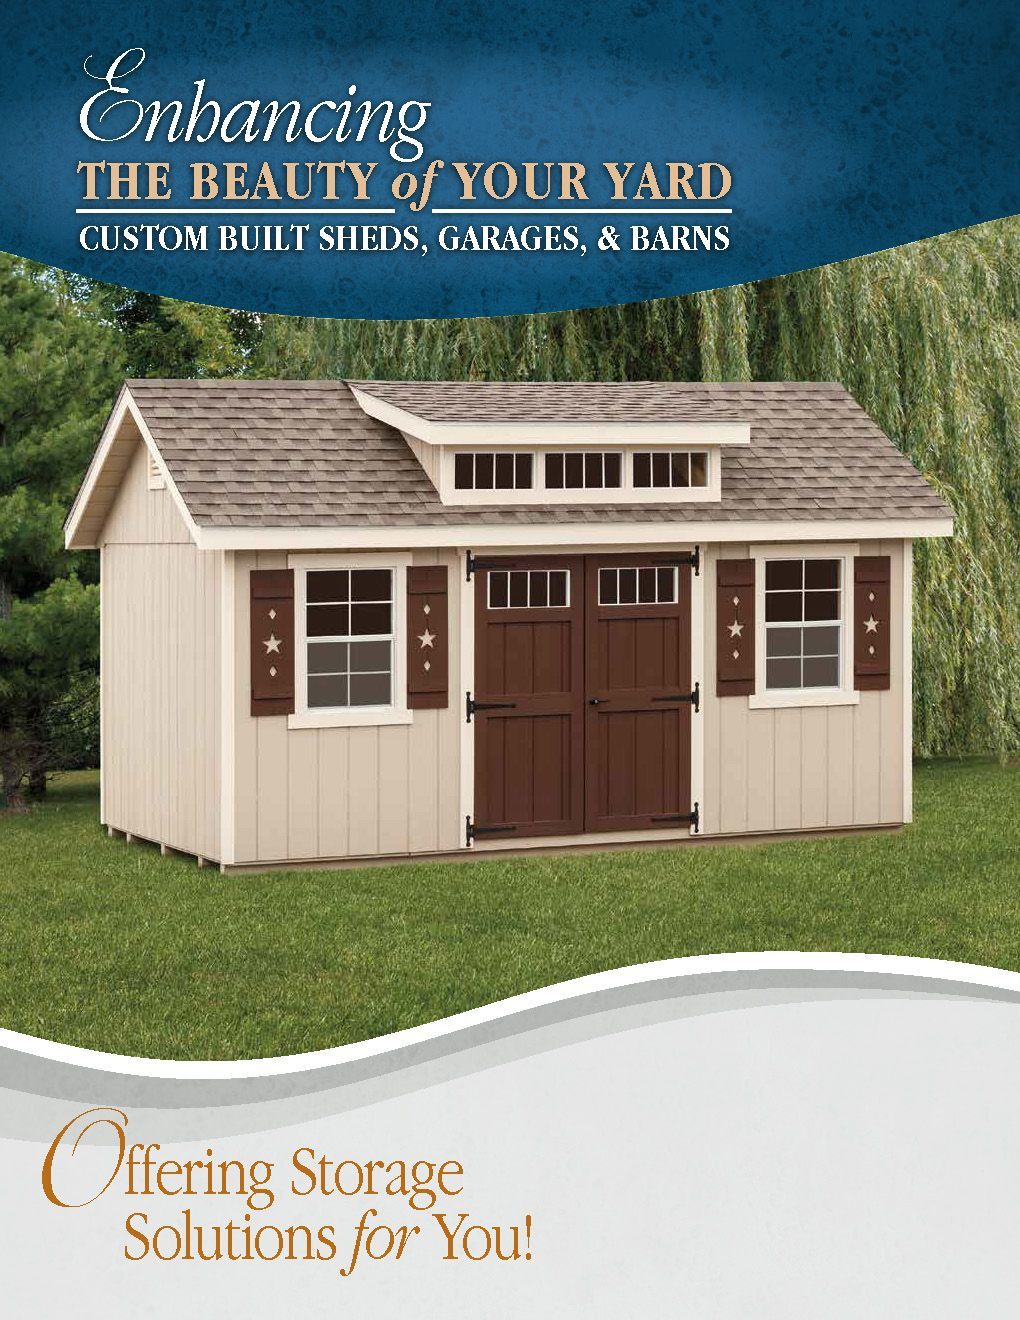 Cover of Jed's Sheds' shed catalog